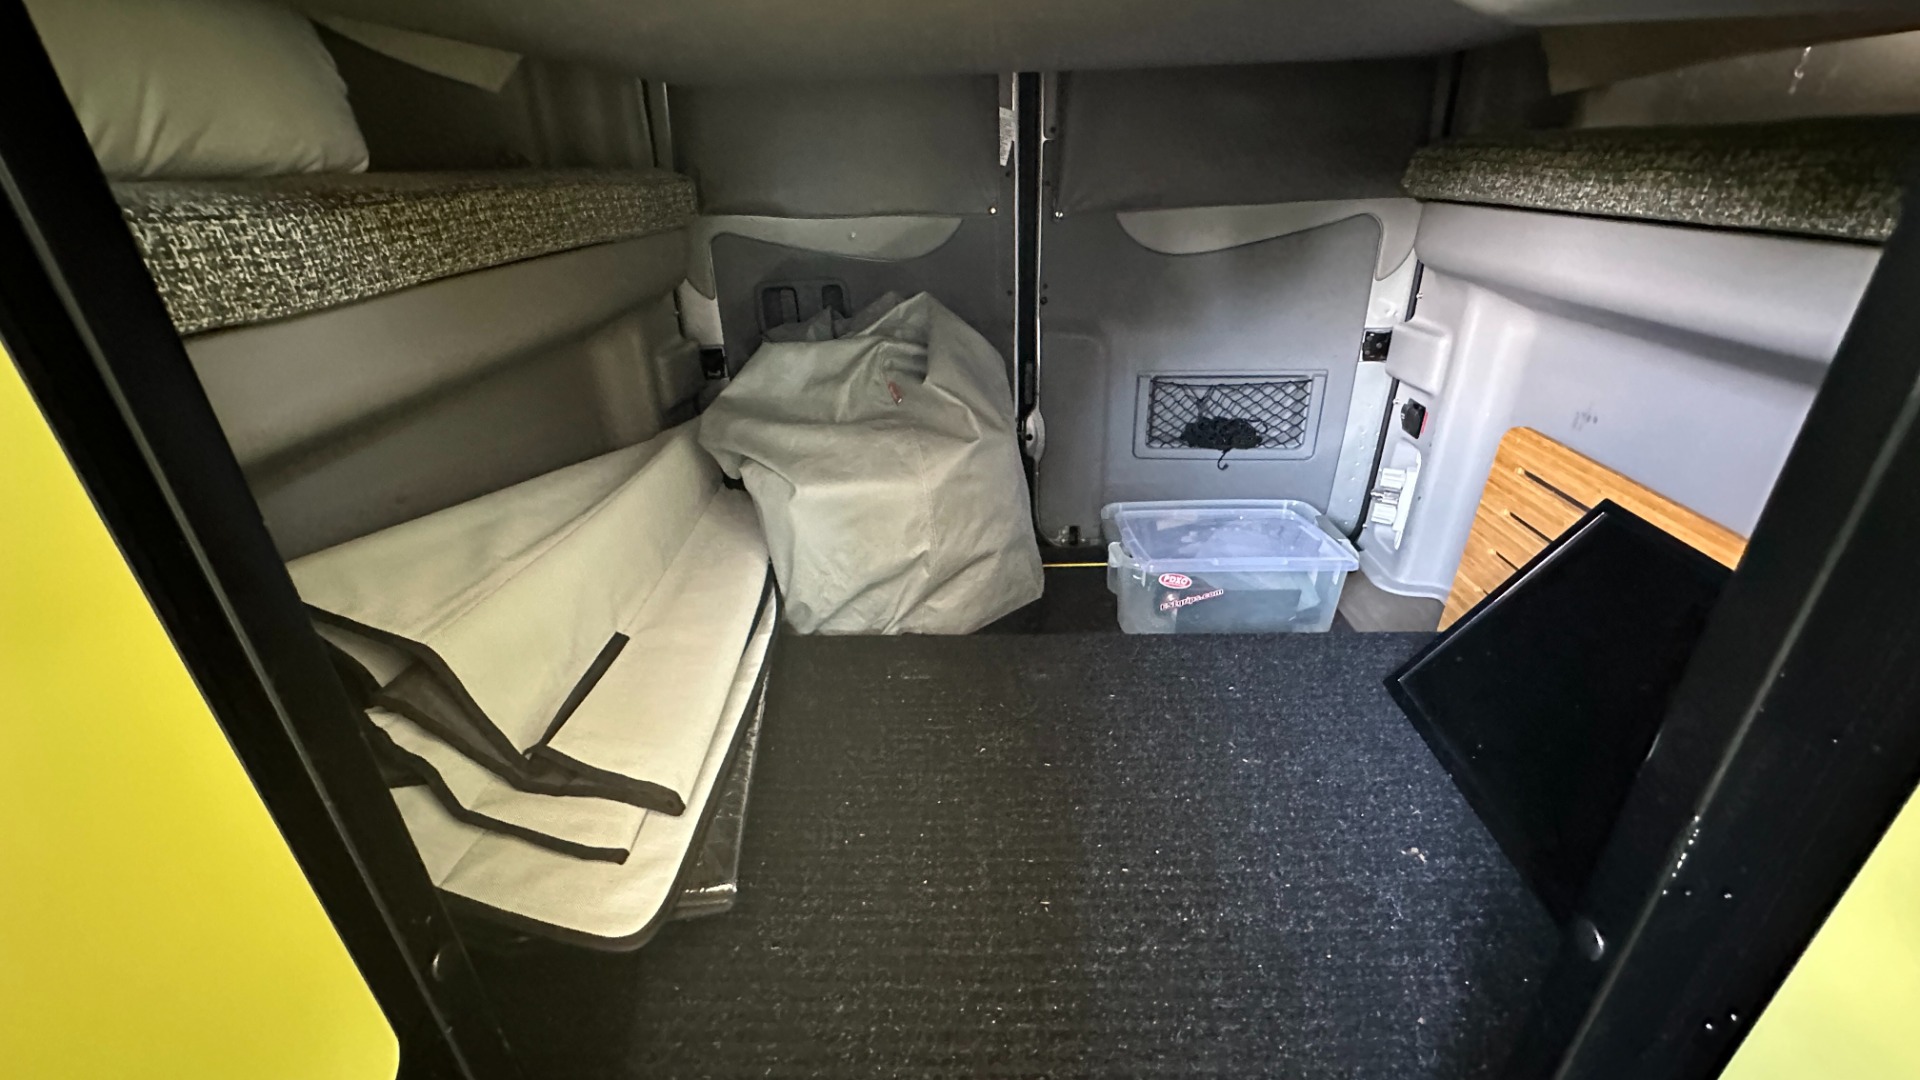 Used 2018 Mercedes-Benz Sprinter Winnebego OVERLANDER / CONVERSION SPRINTER / 4X4 / KITCHEN / BATHROOM / AIR / AWNING for sale $129,000 at Formula Imports in Charlotte NC 28227 85